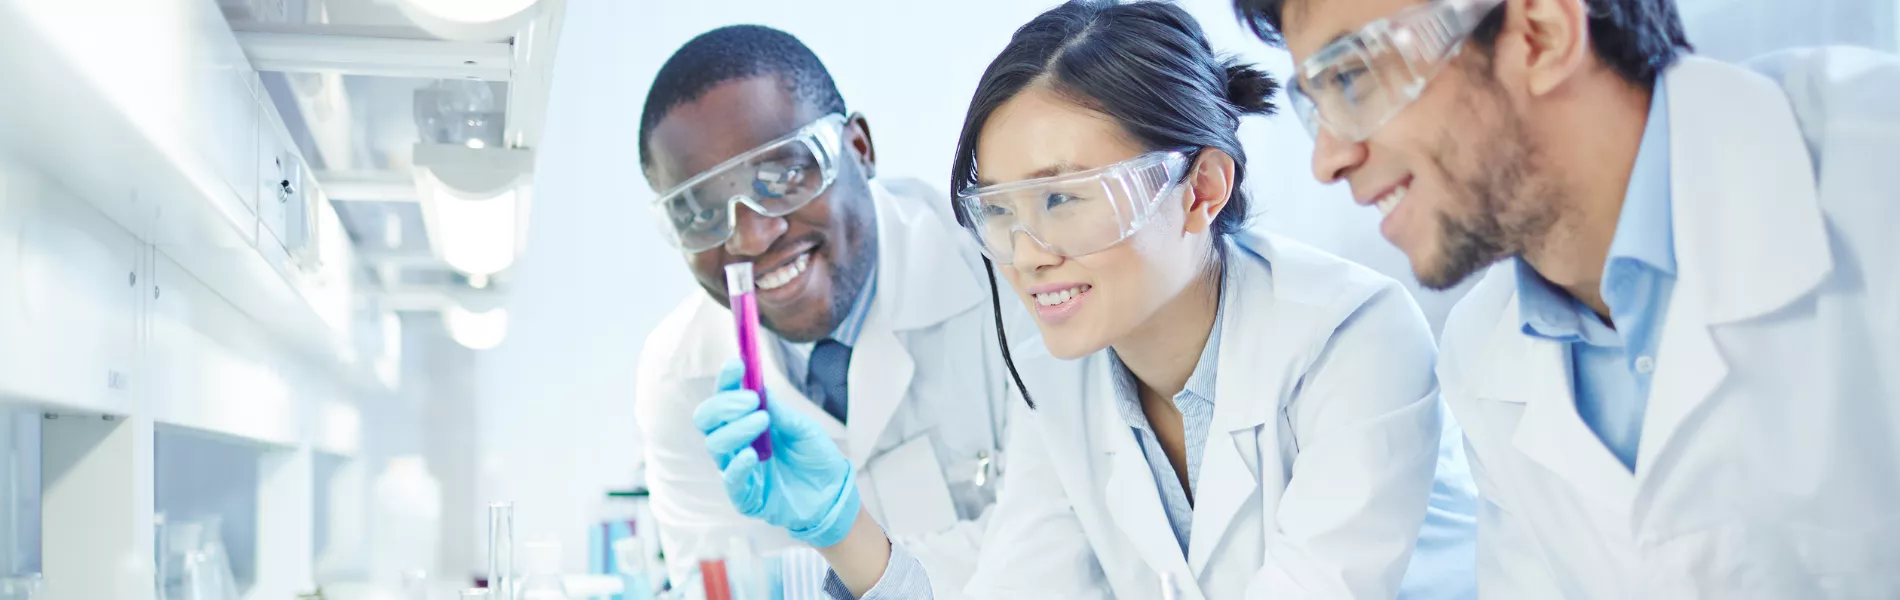 Students in lab coats collaborating